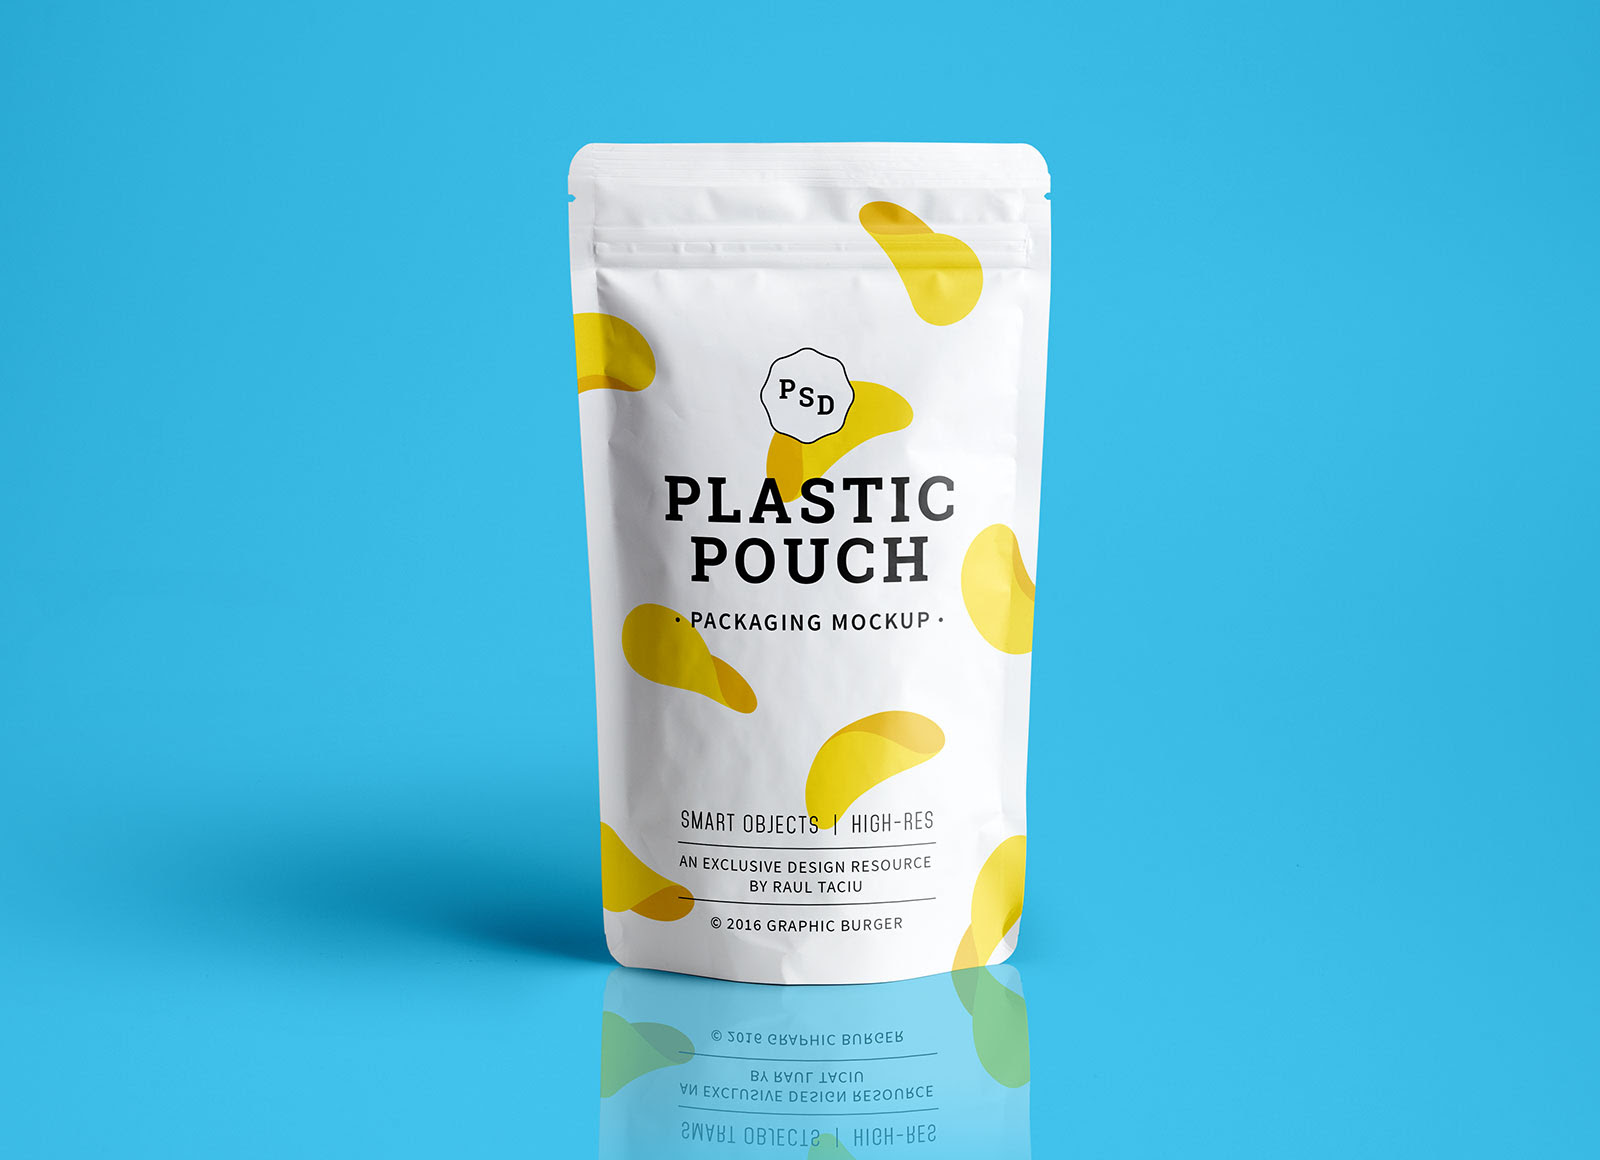 Free Standing Plastic Pouch Packaging Mockup PSD Good Mockups